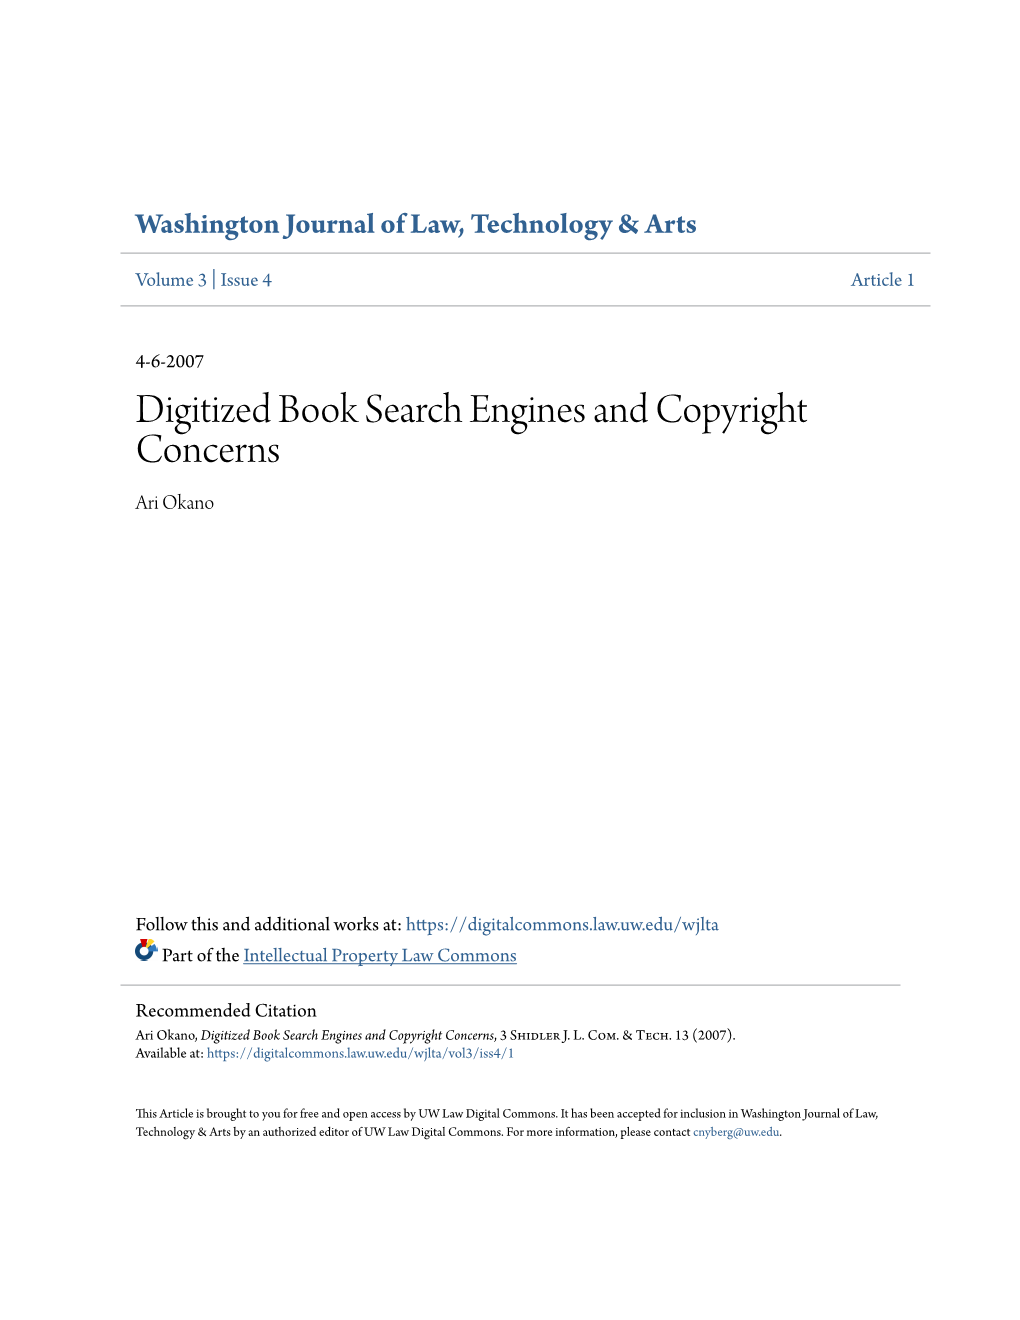 Digitized Book Search Engines and Copyright Concerns Ari Okano